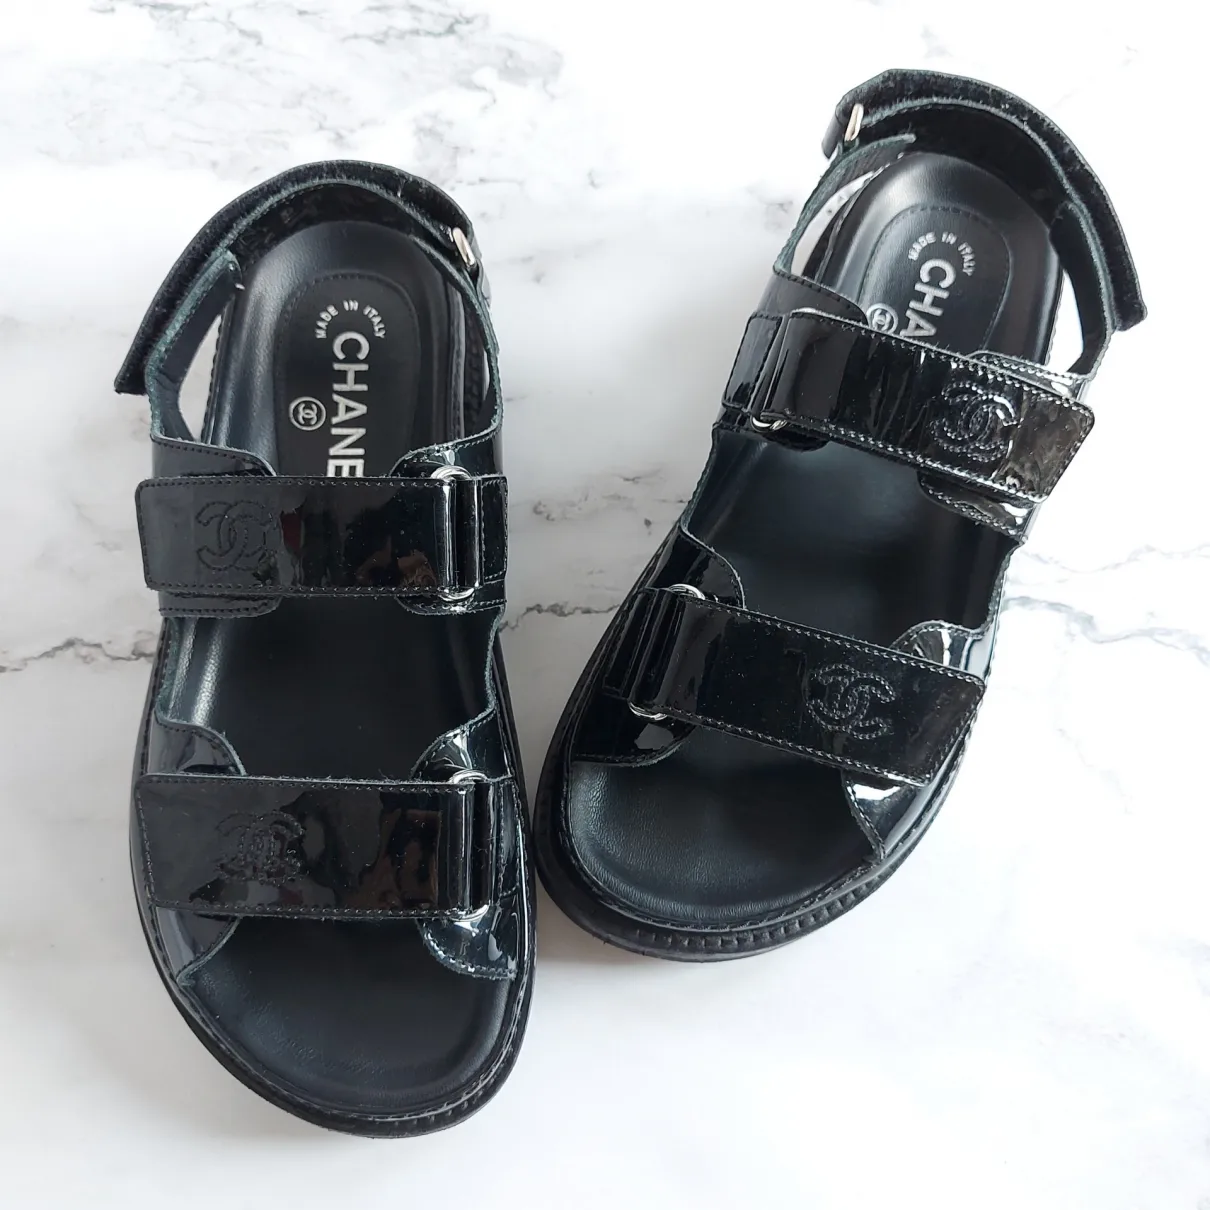 Chanel Patent Leather Sandals